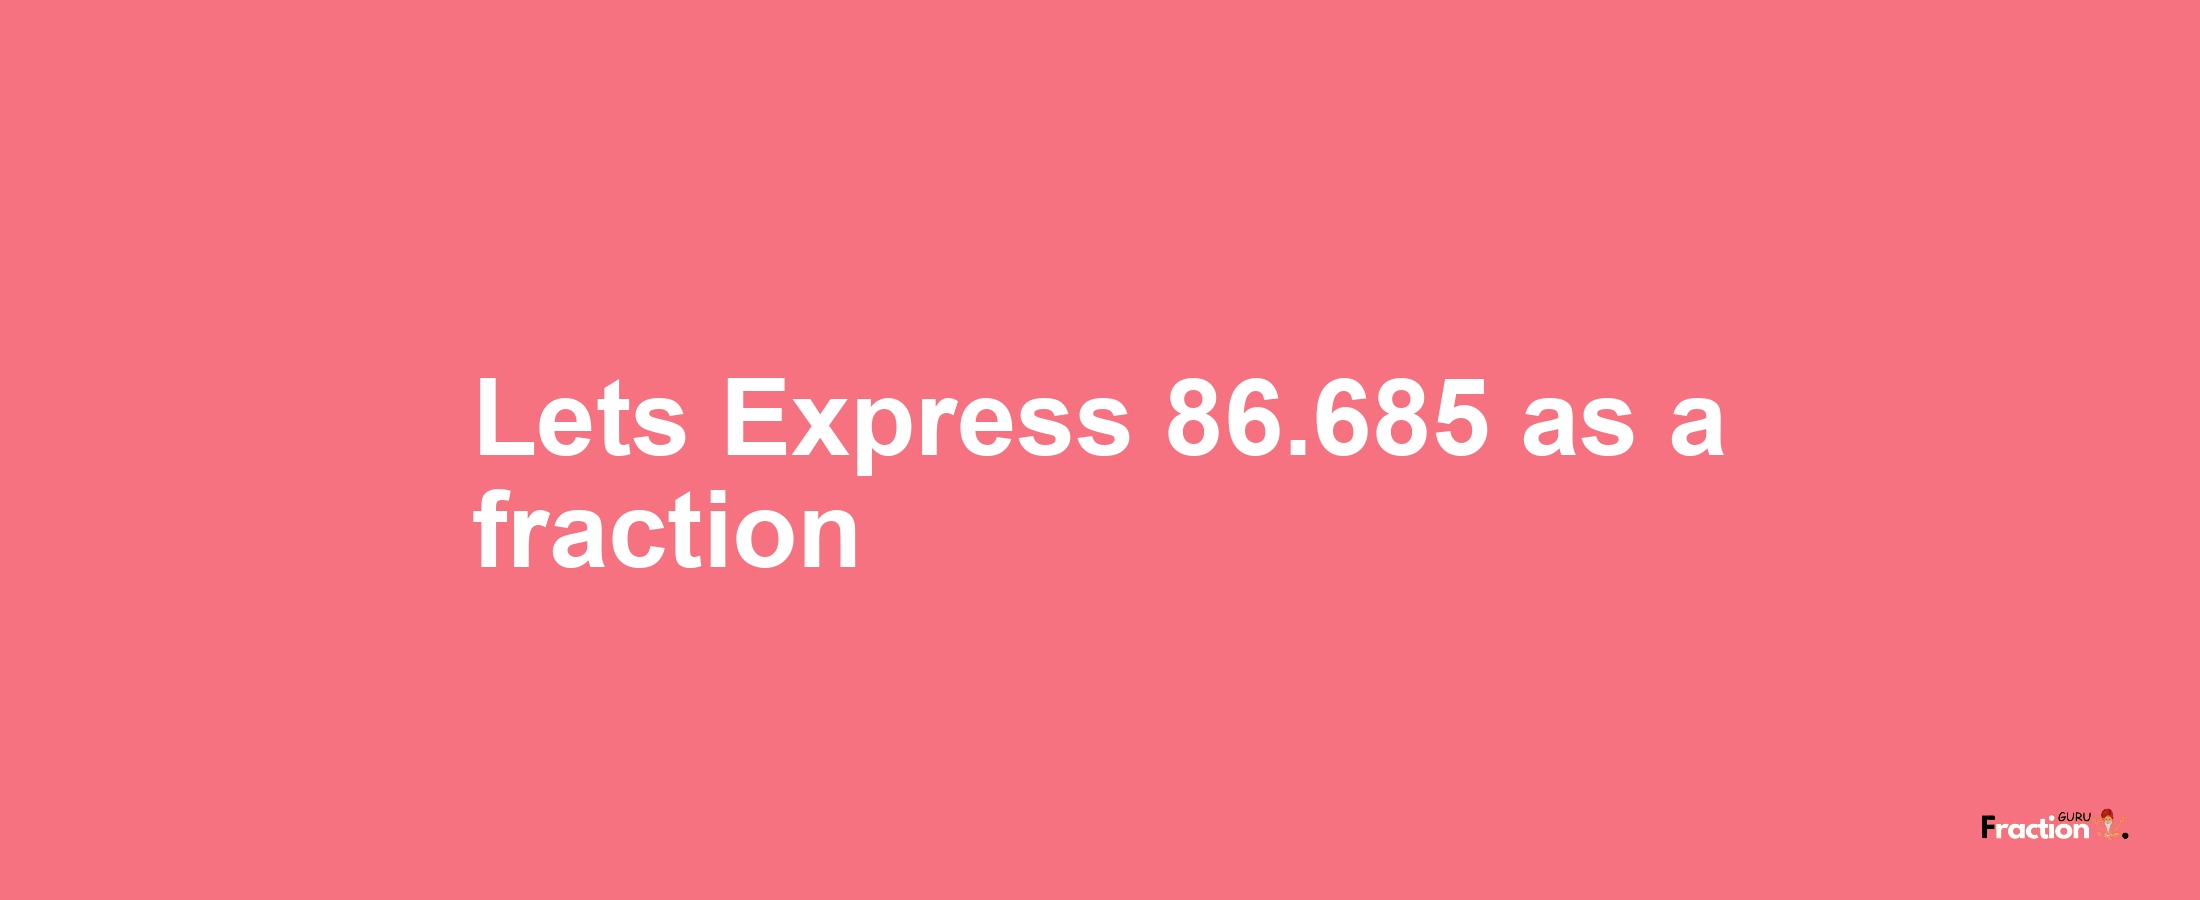 Lets Express 86.685 as afraction